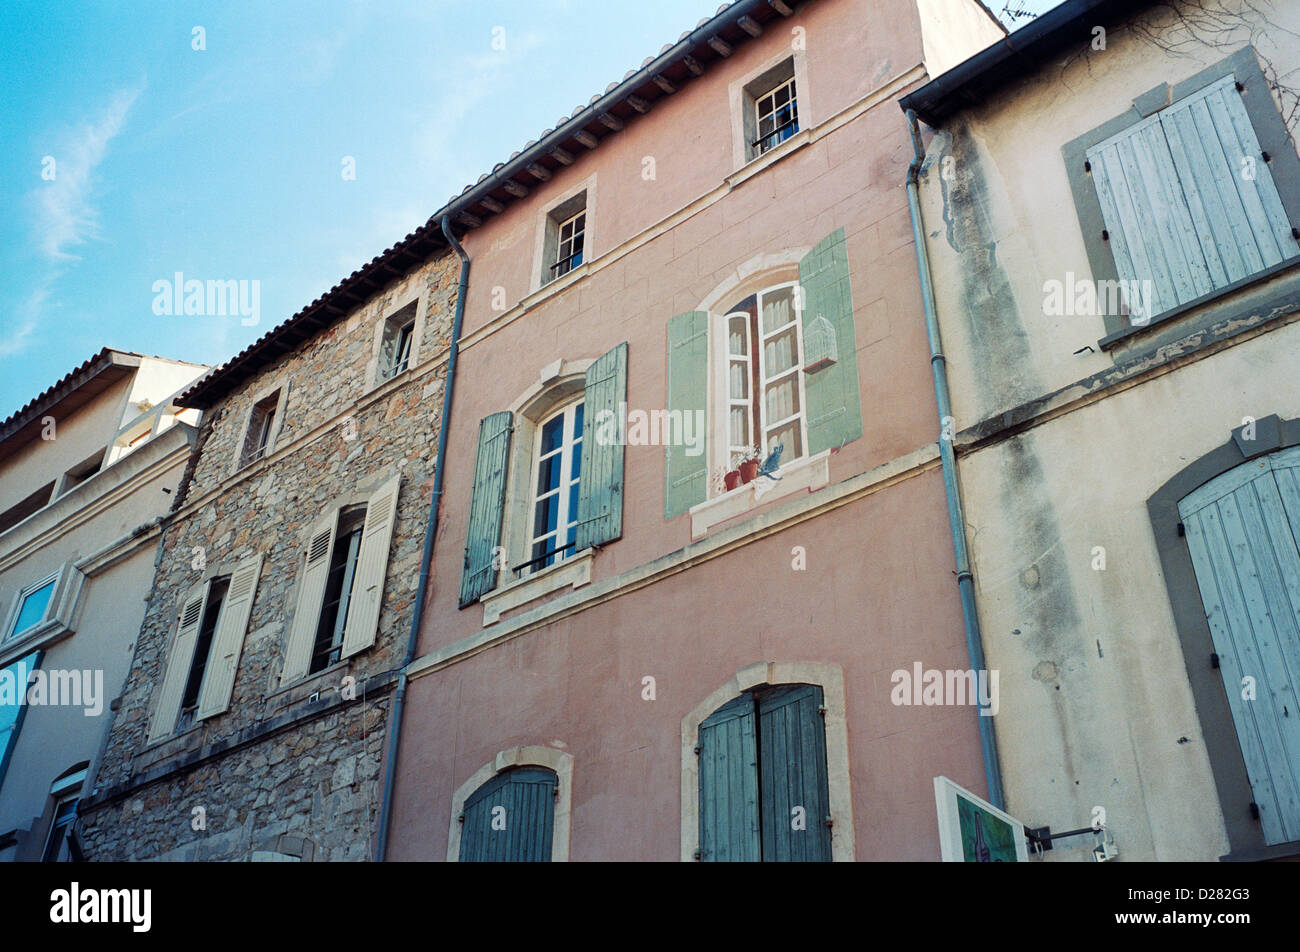 House with painted fake window and shutters, Arles, Provence, France Stock Photo